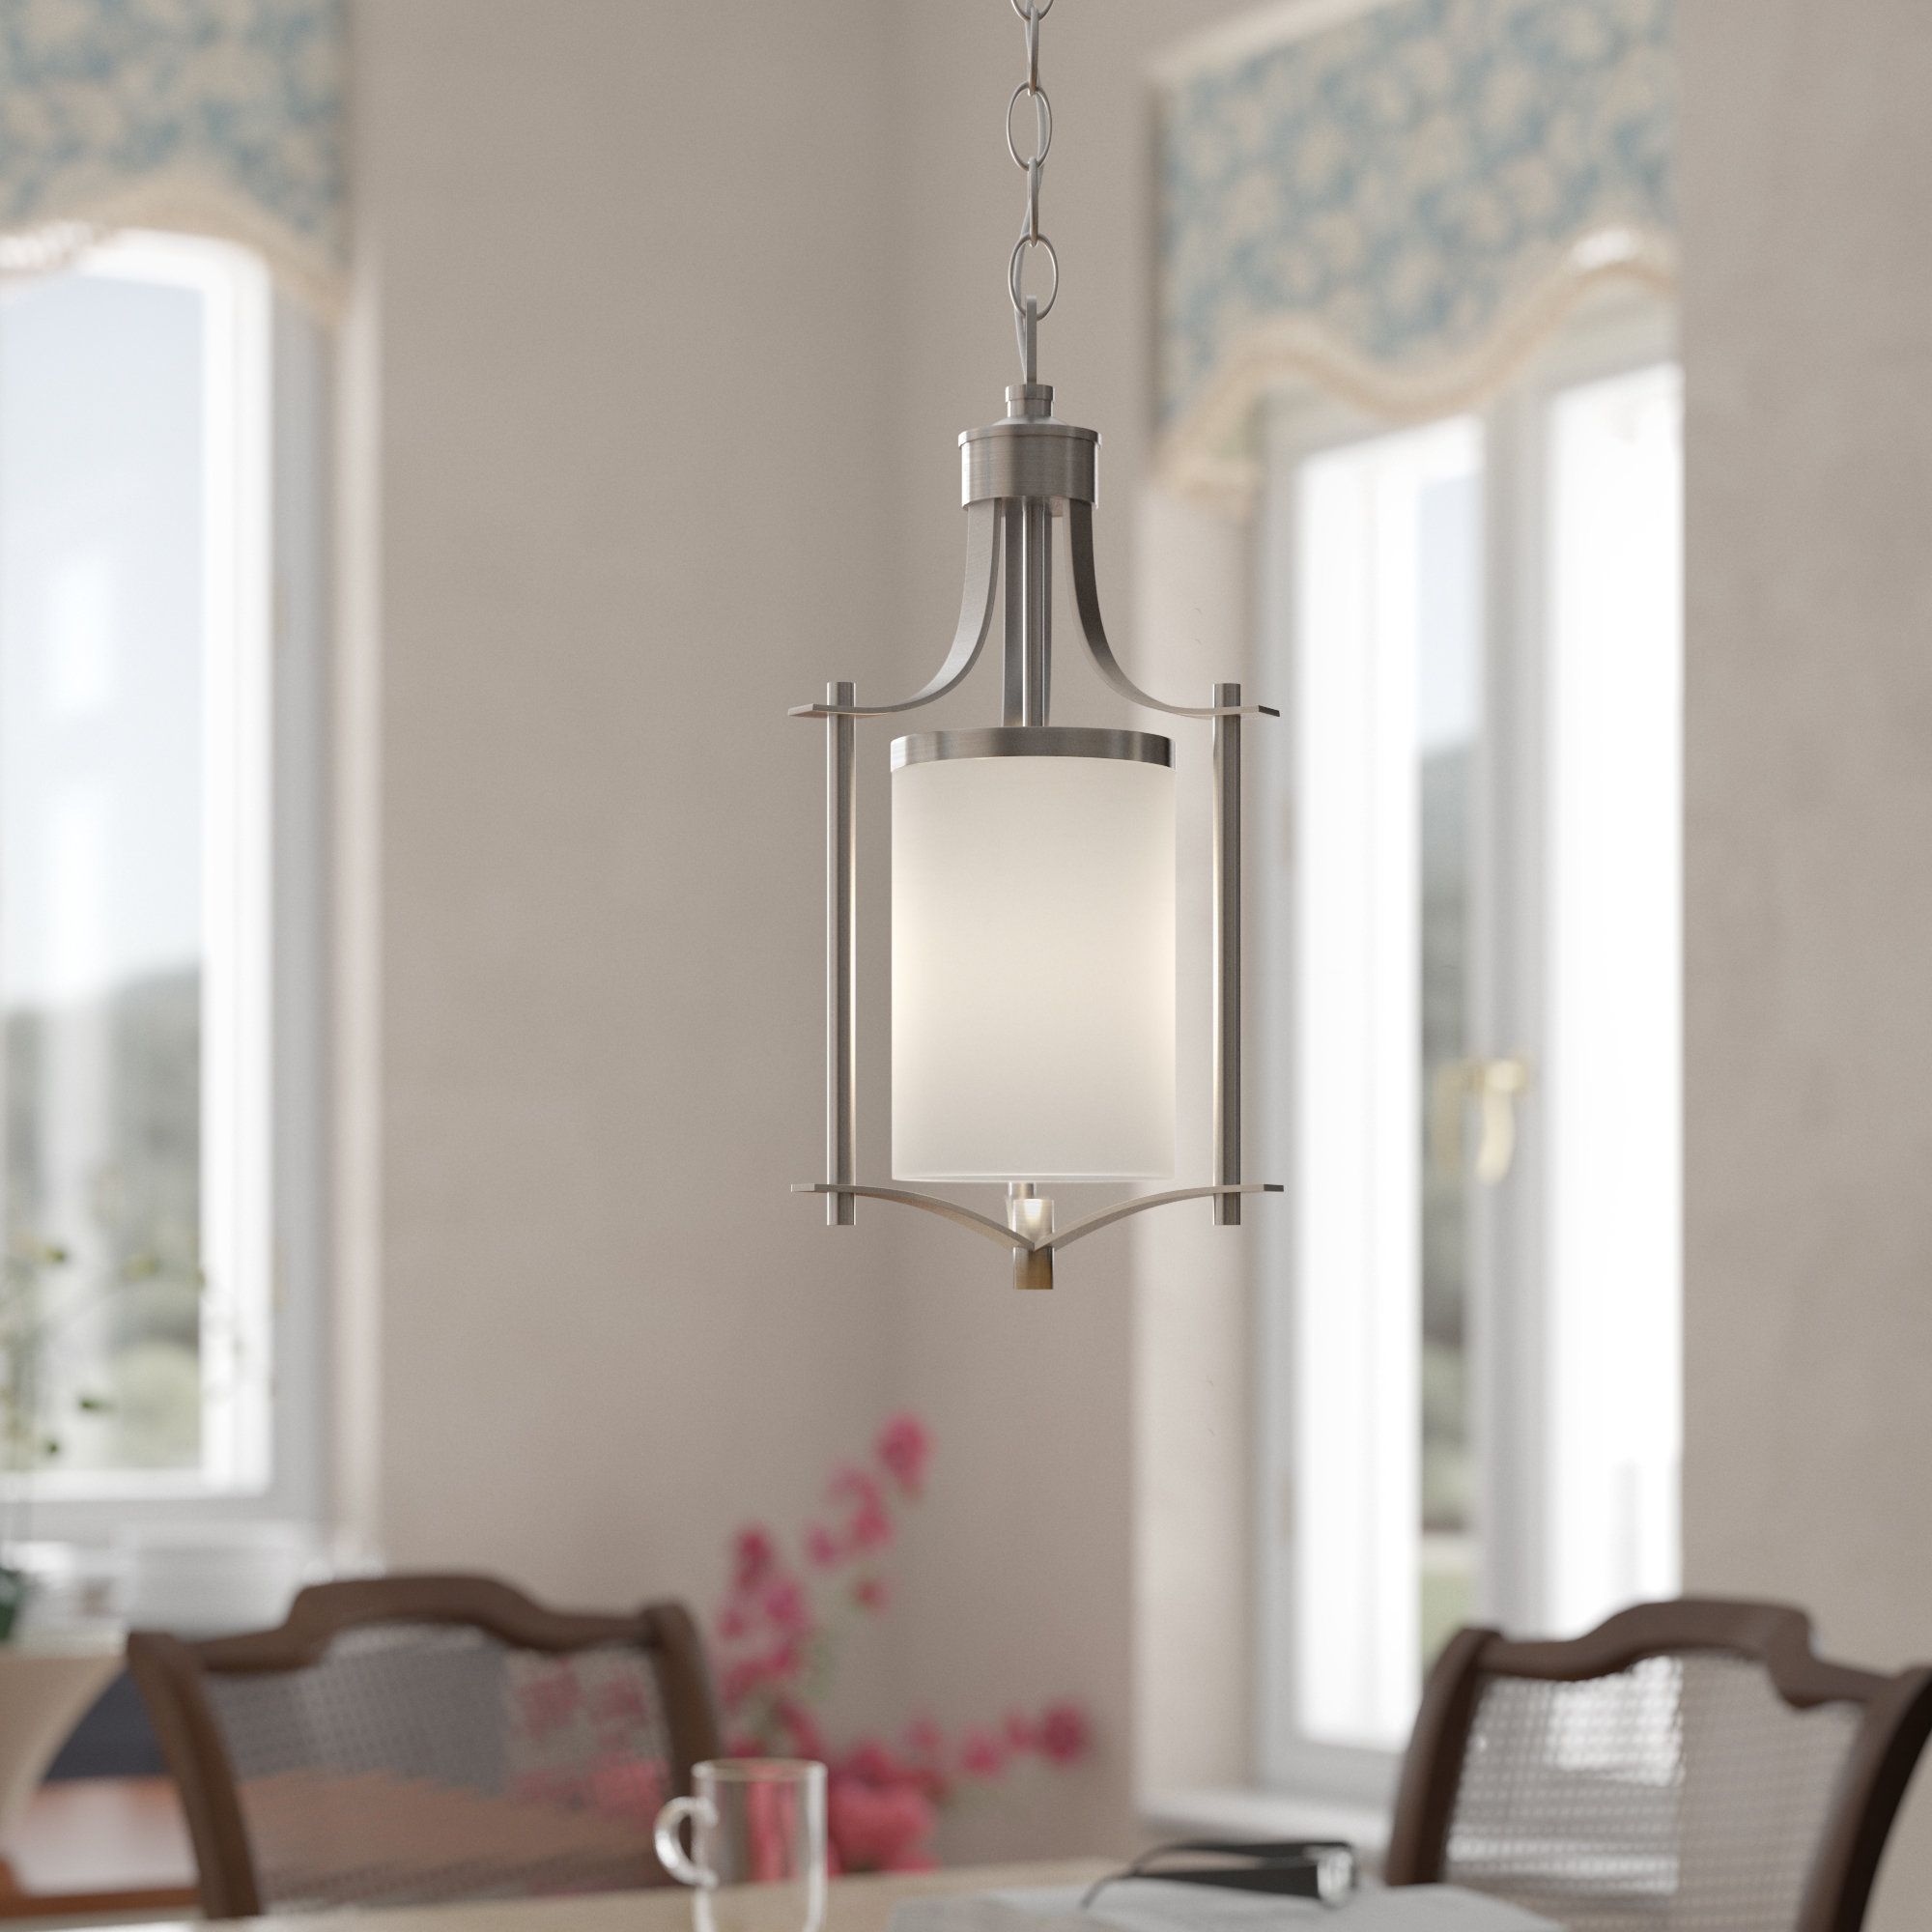 Pewter & Silver & Satin Nickel Pendant Lighting You'll Love Intended For Kimsey 1 Light Teardrop Pendants (View 30 of 30)